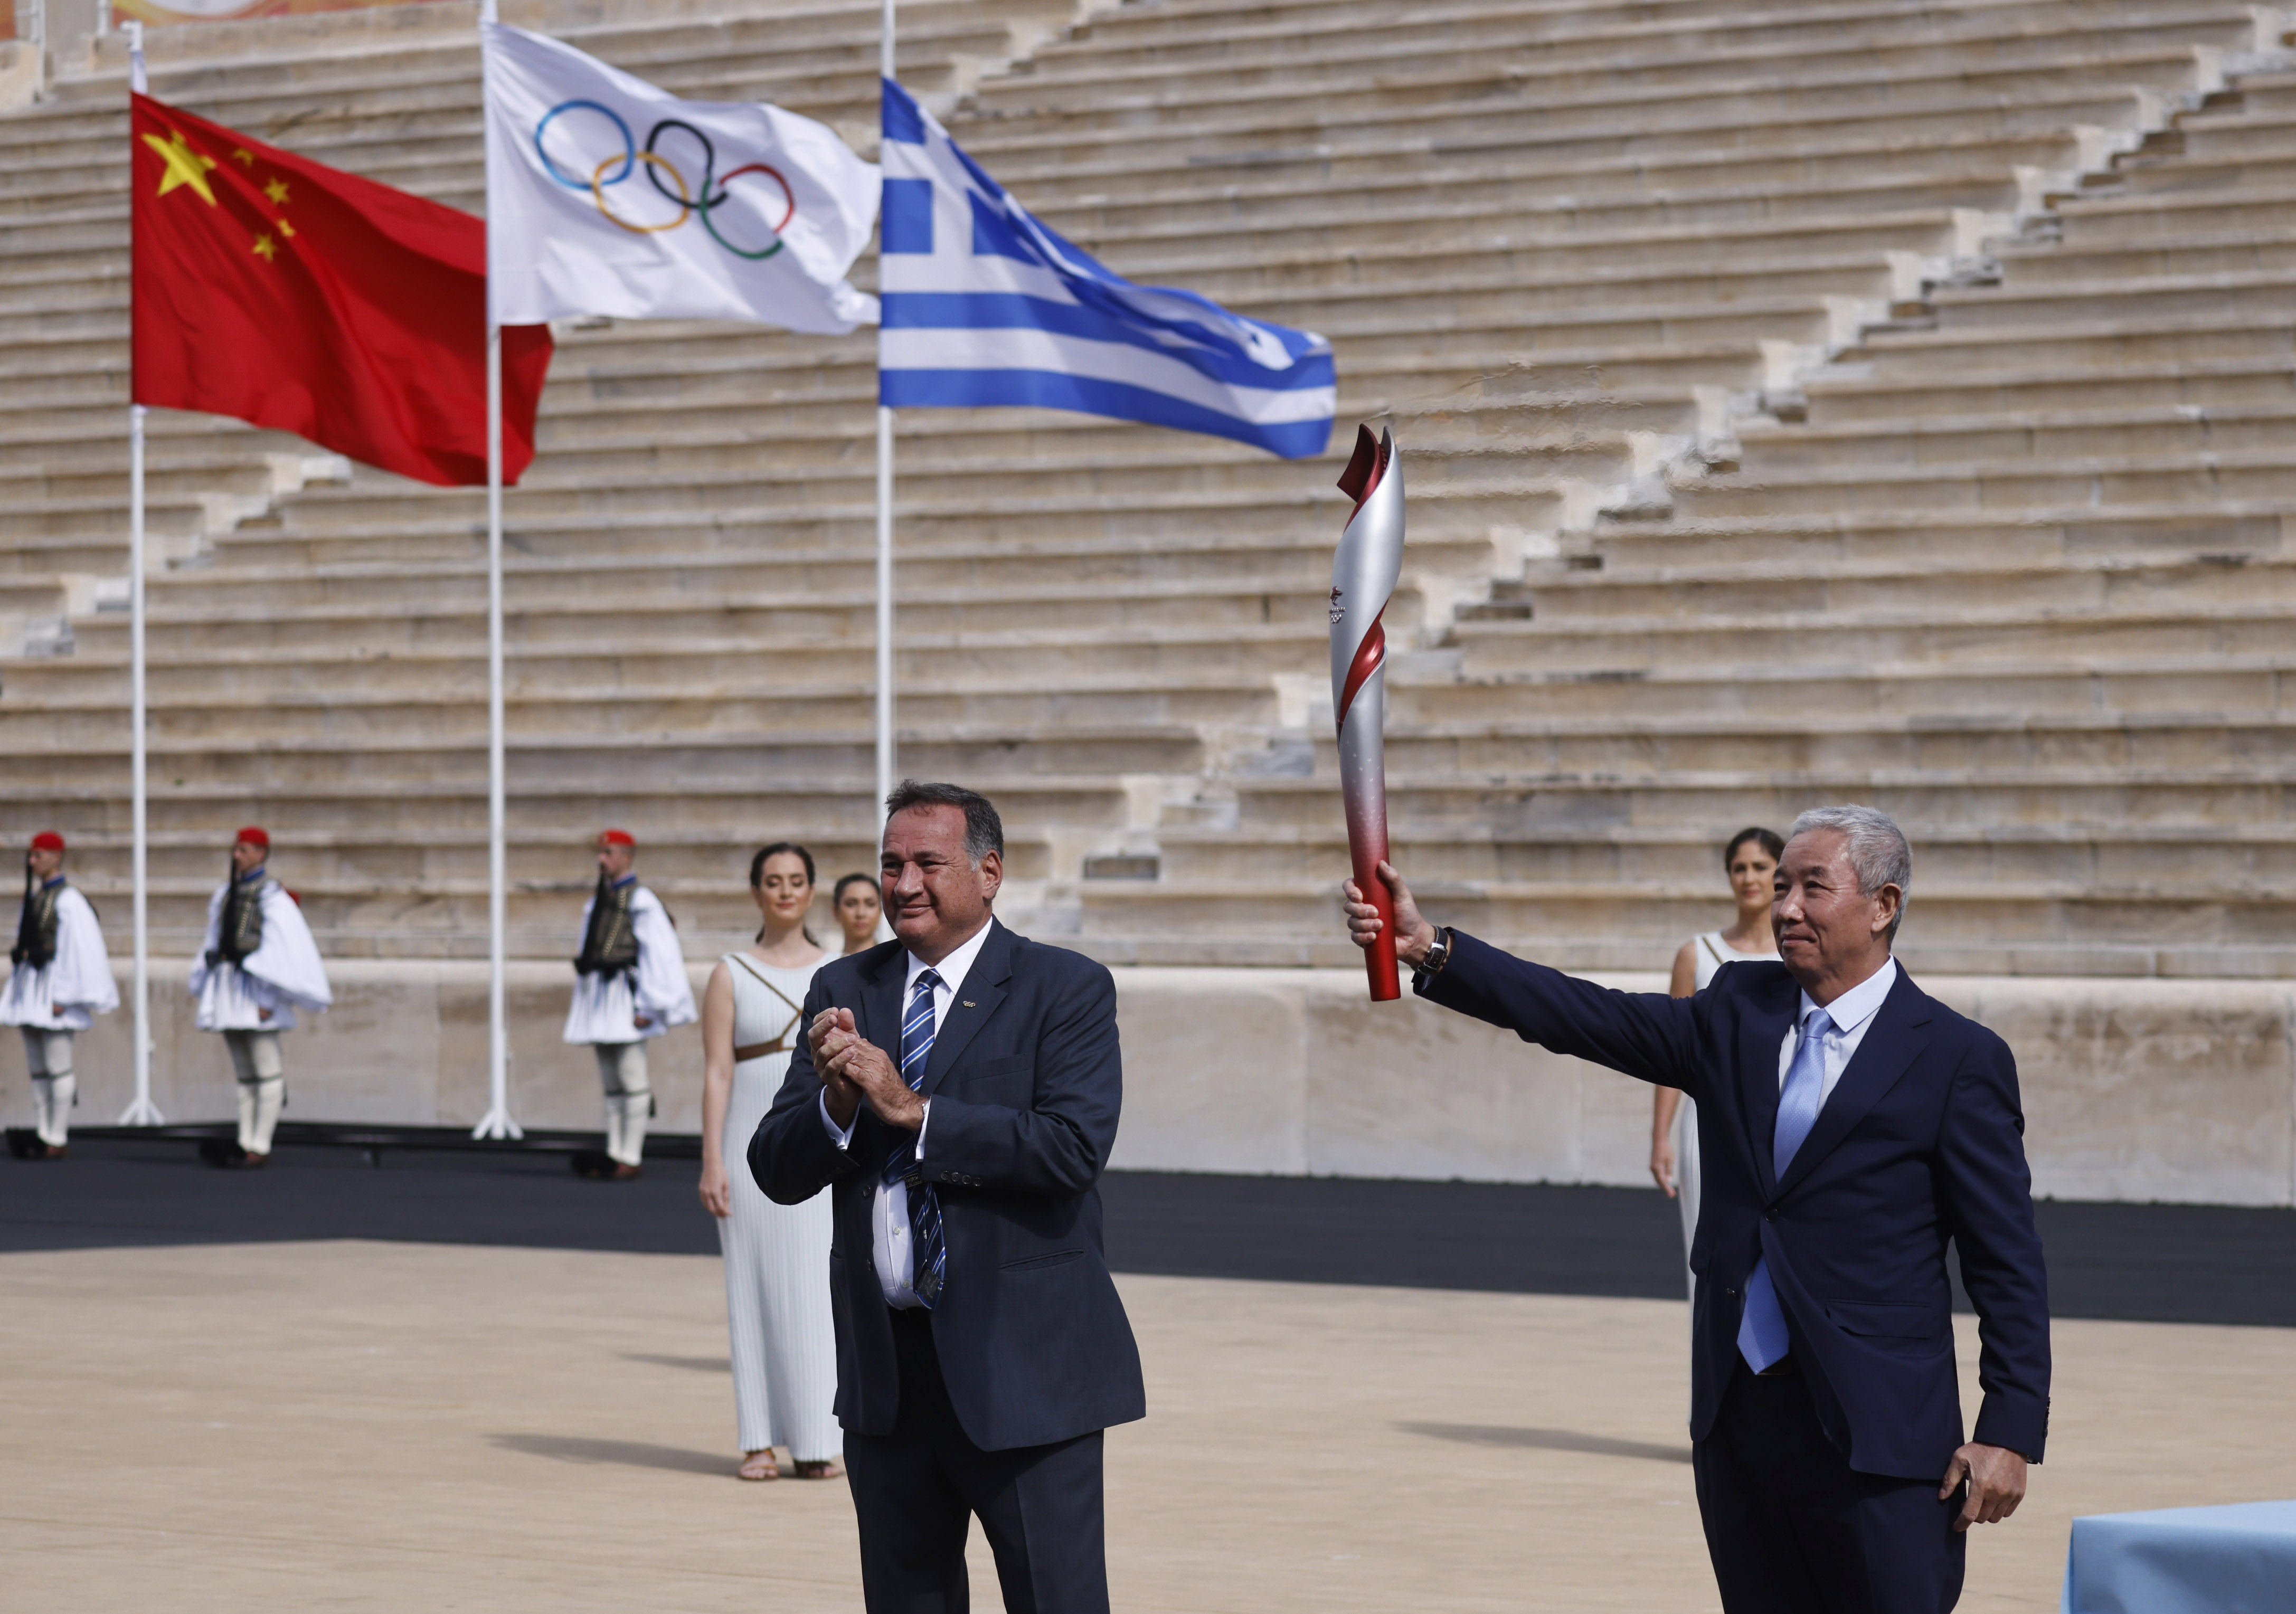 No spectators, no protests as Olympic flame is handed over to Beijing 2022 at historic Panathenaic Stadium in Athens